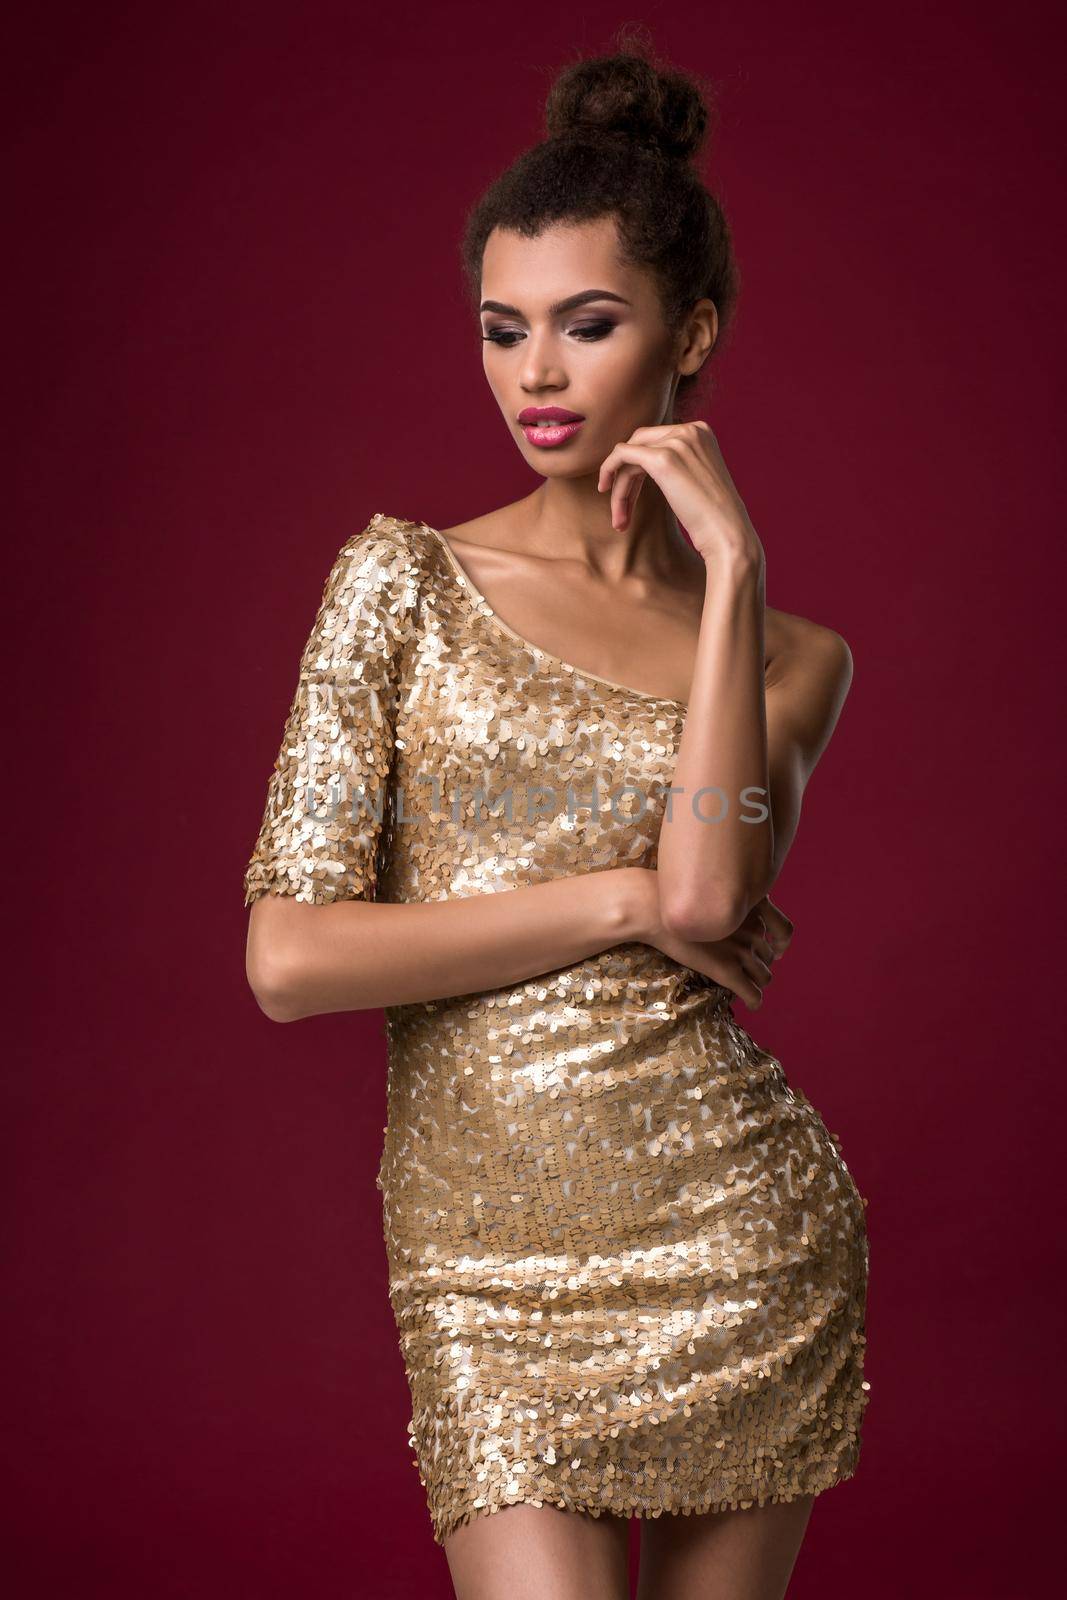 Fashion young African woman with makeup, in short sexy gold dress. Model on a red background in the studio